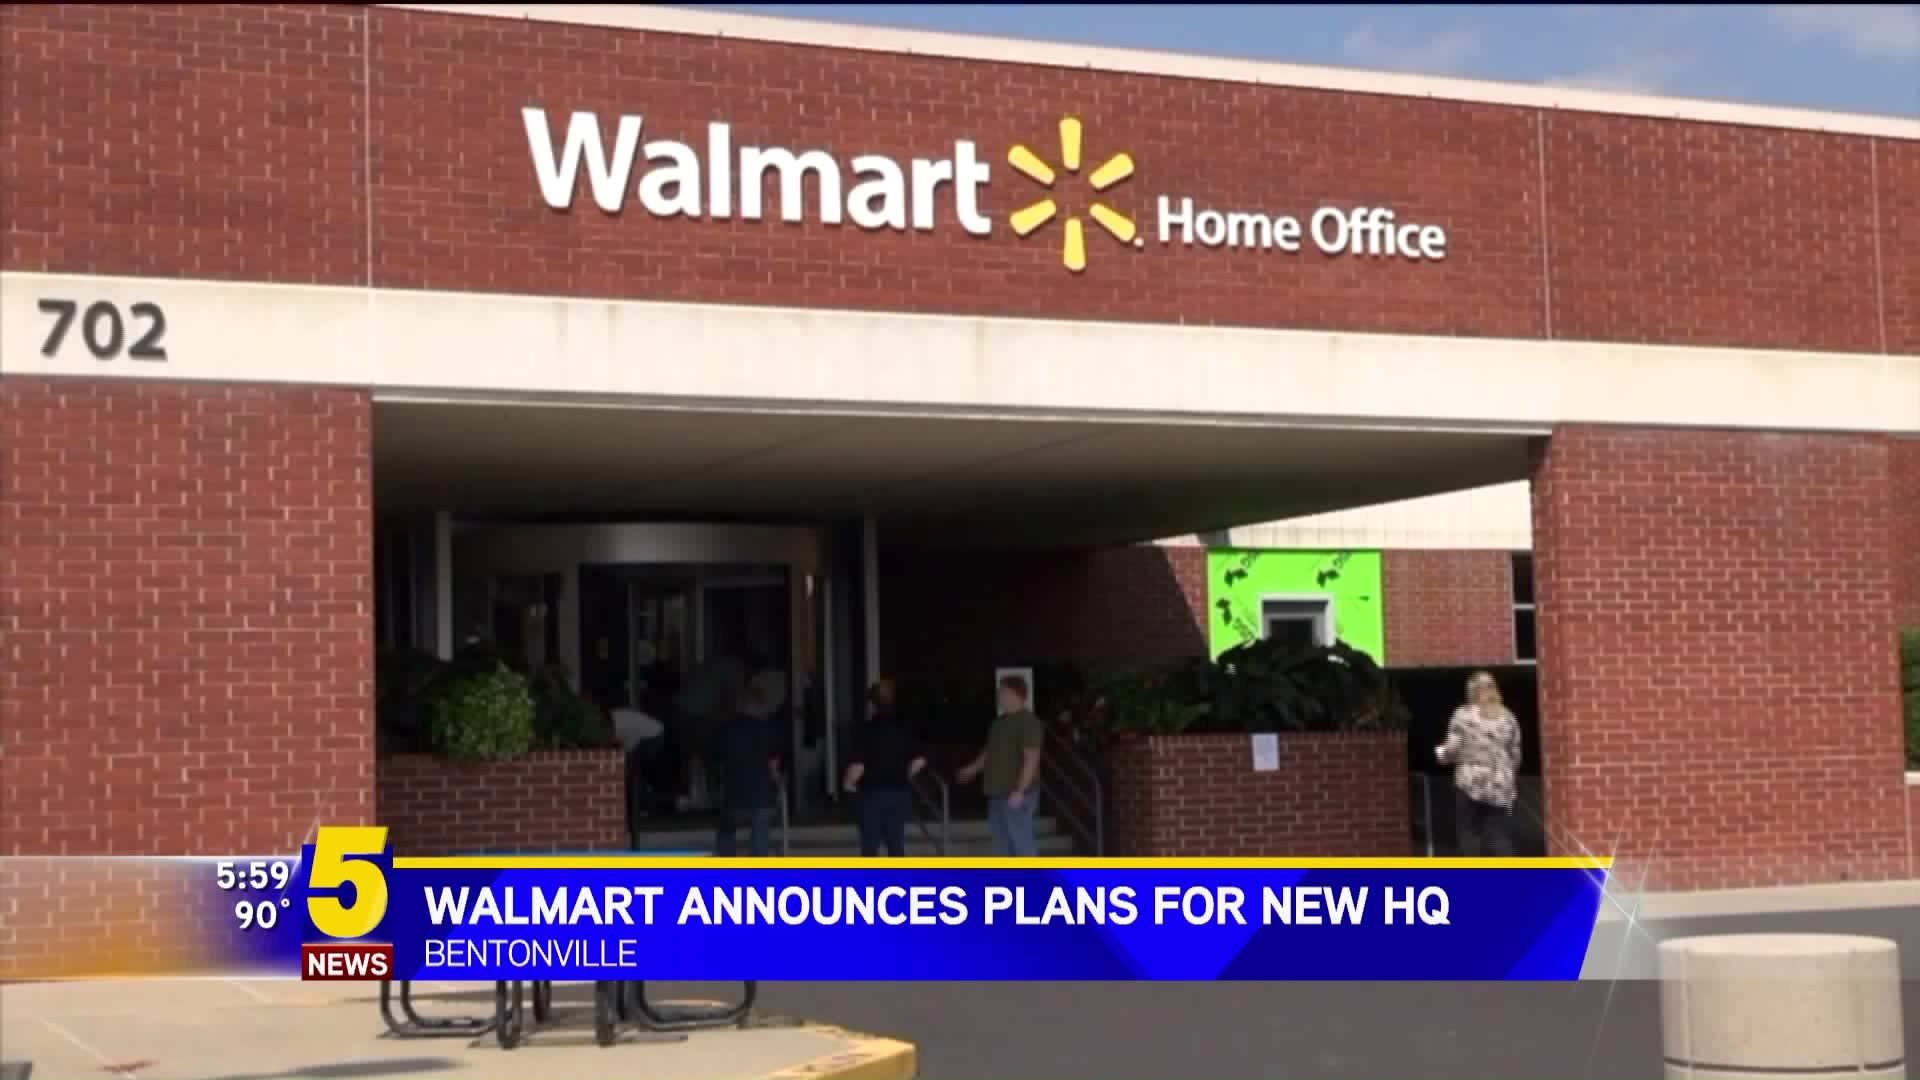 Walmart Announces Plans For New Home Offices